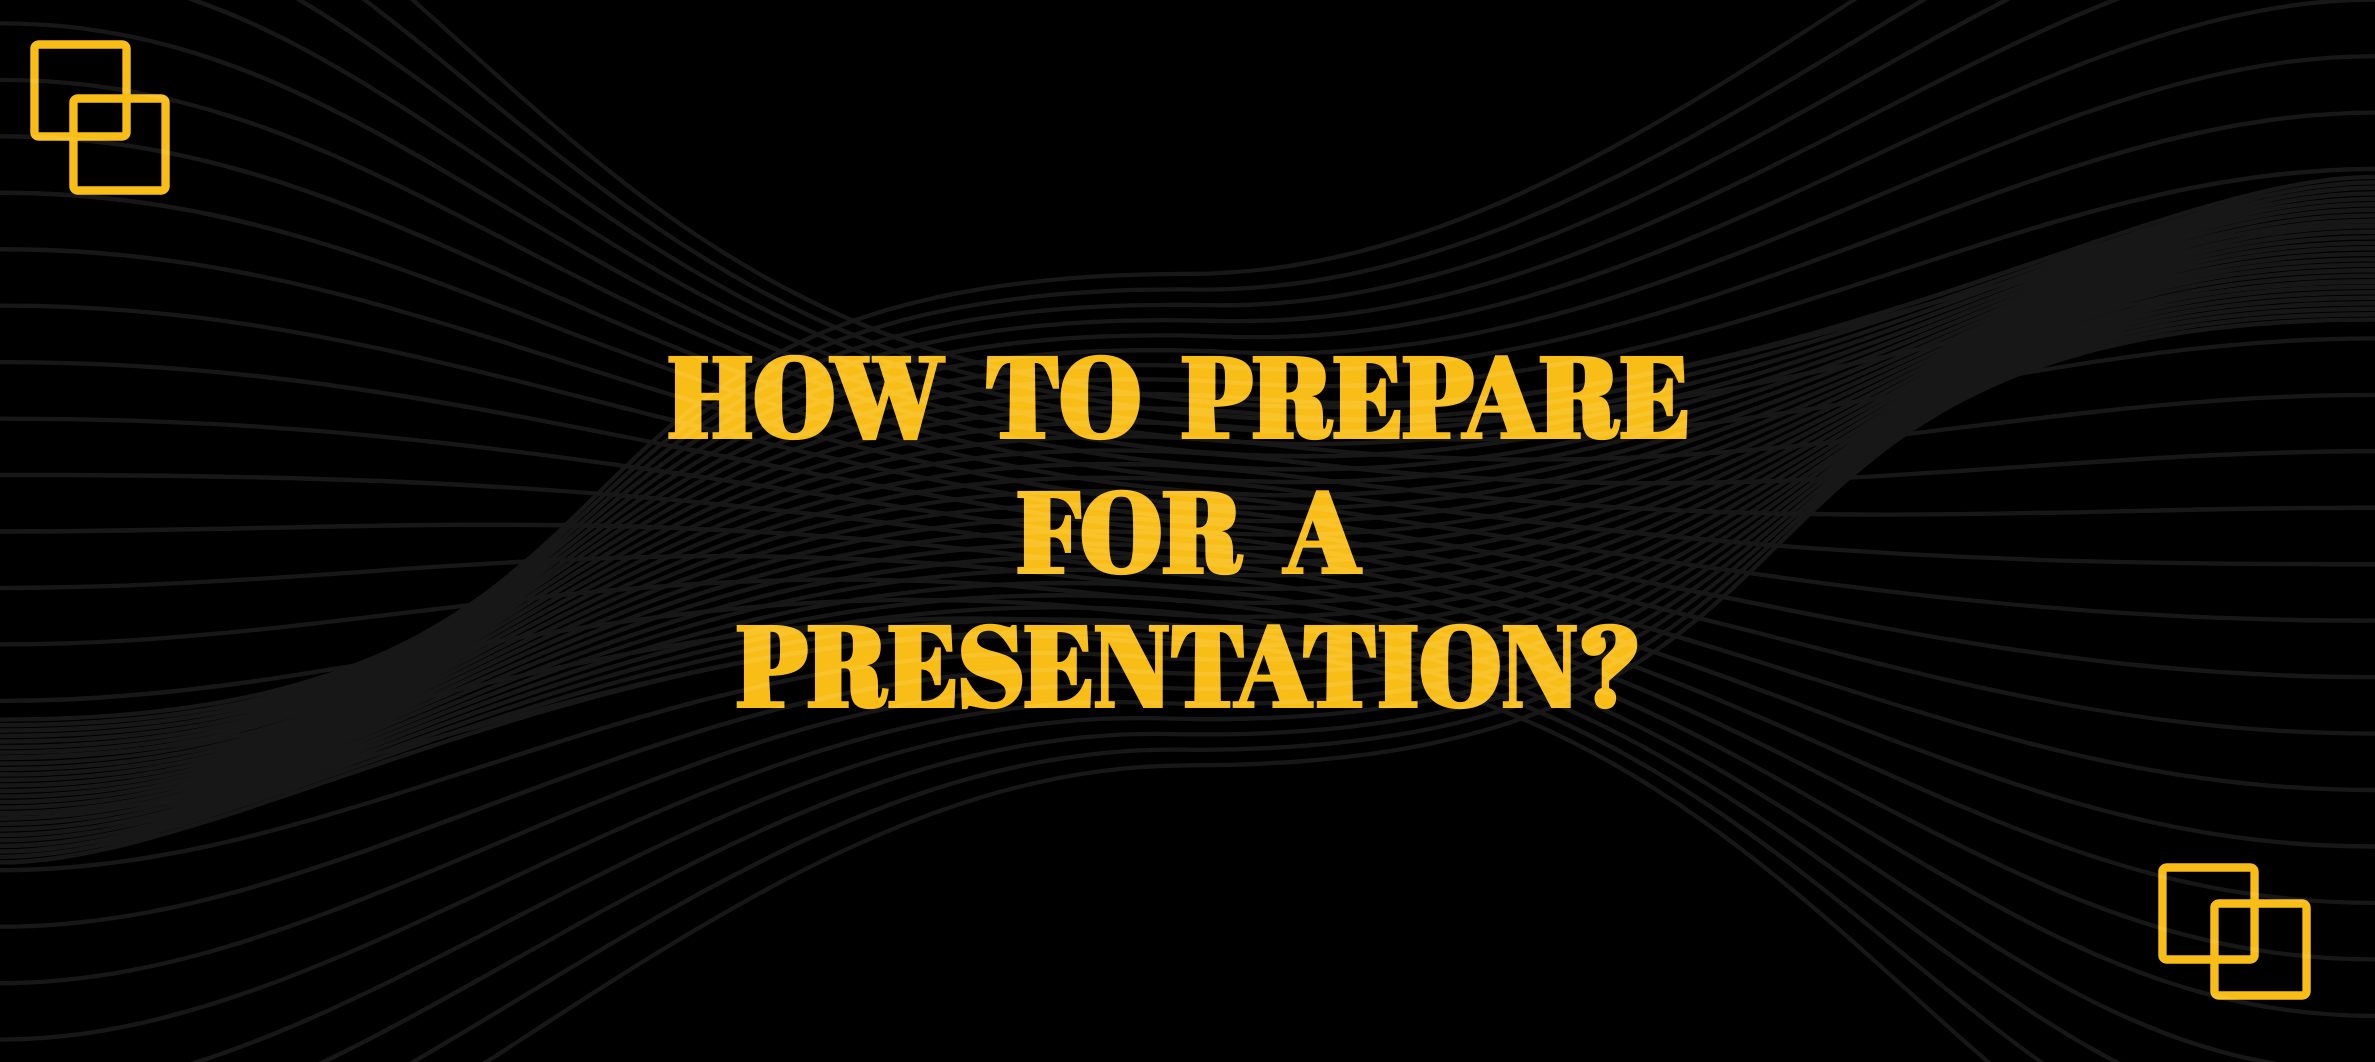 Best Presentation Meme Templates That Will Make Your Audience Laugh